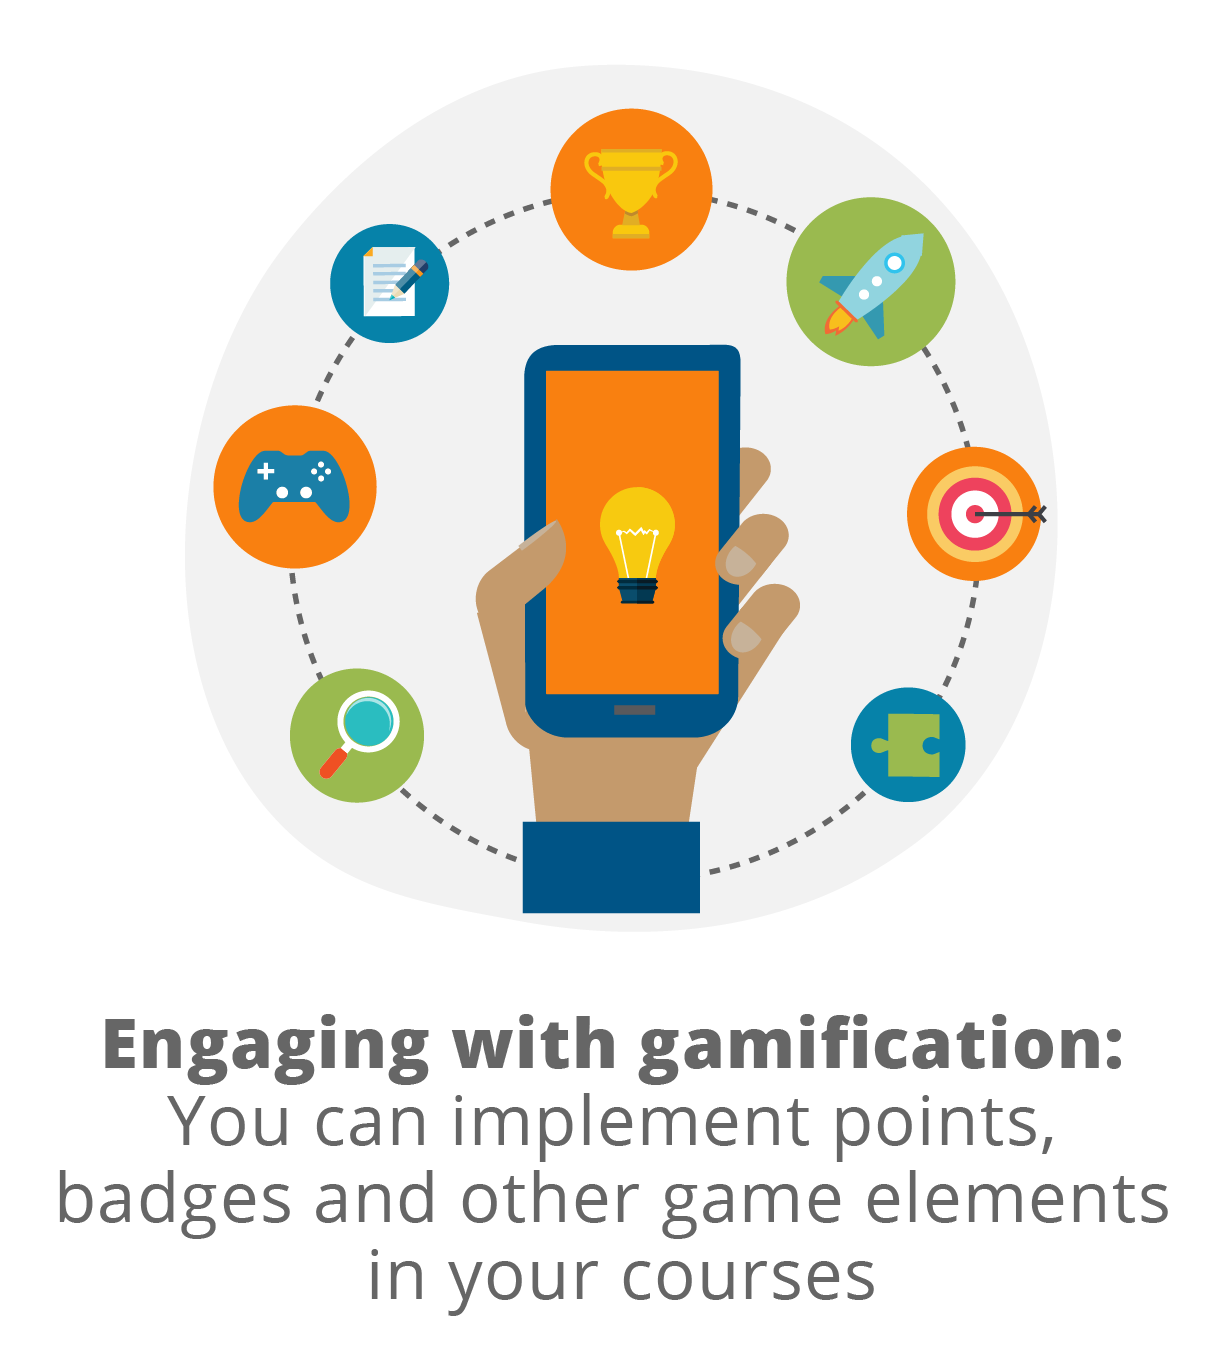 Create active learning experiences including gamification for your students